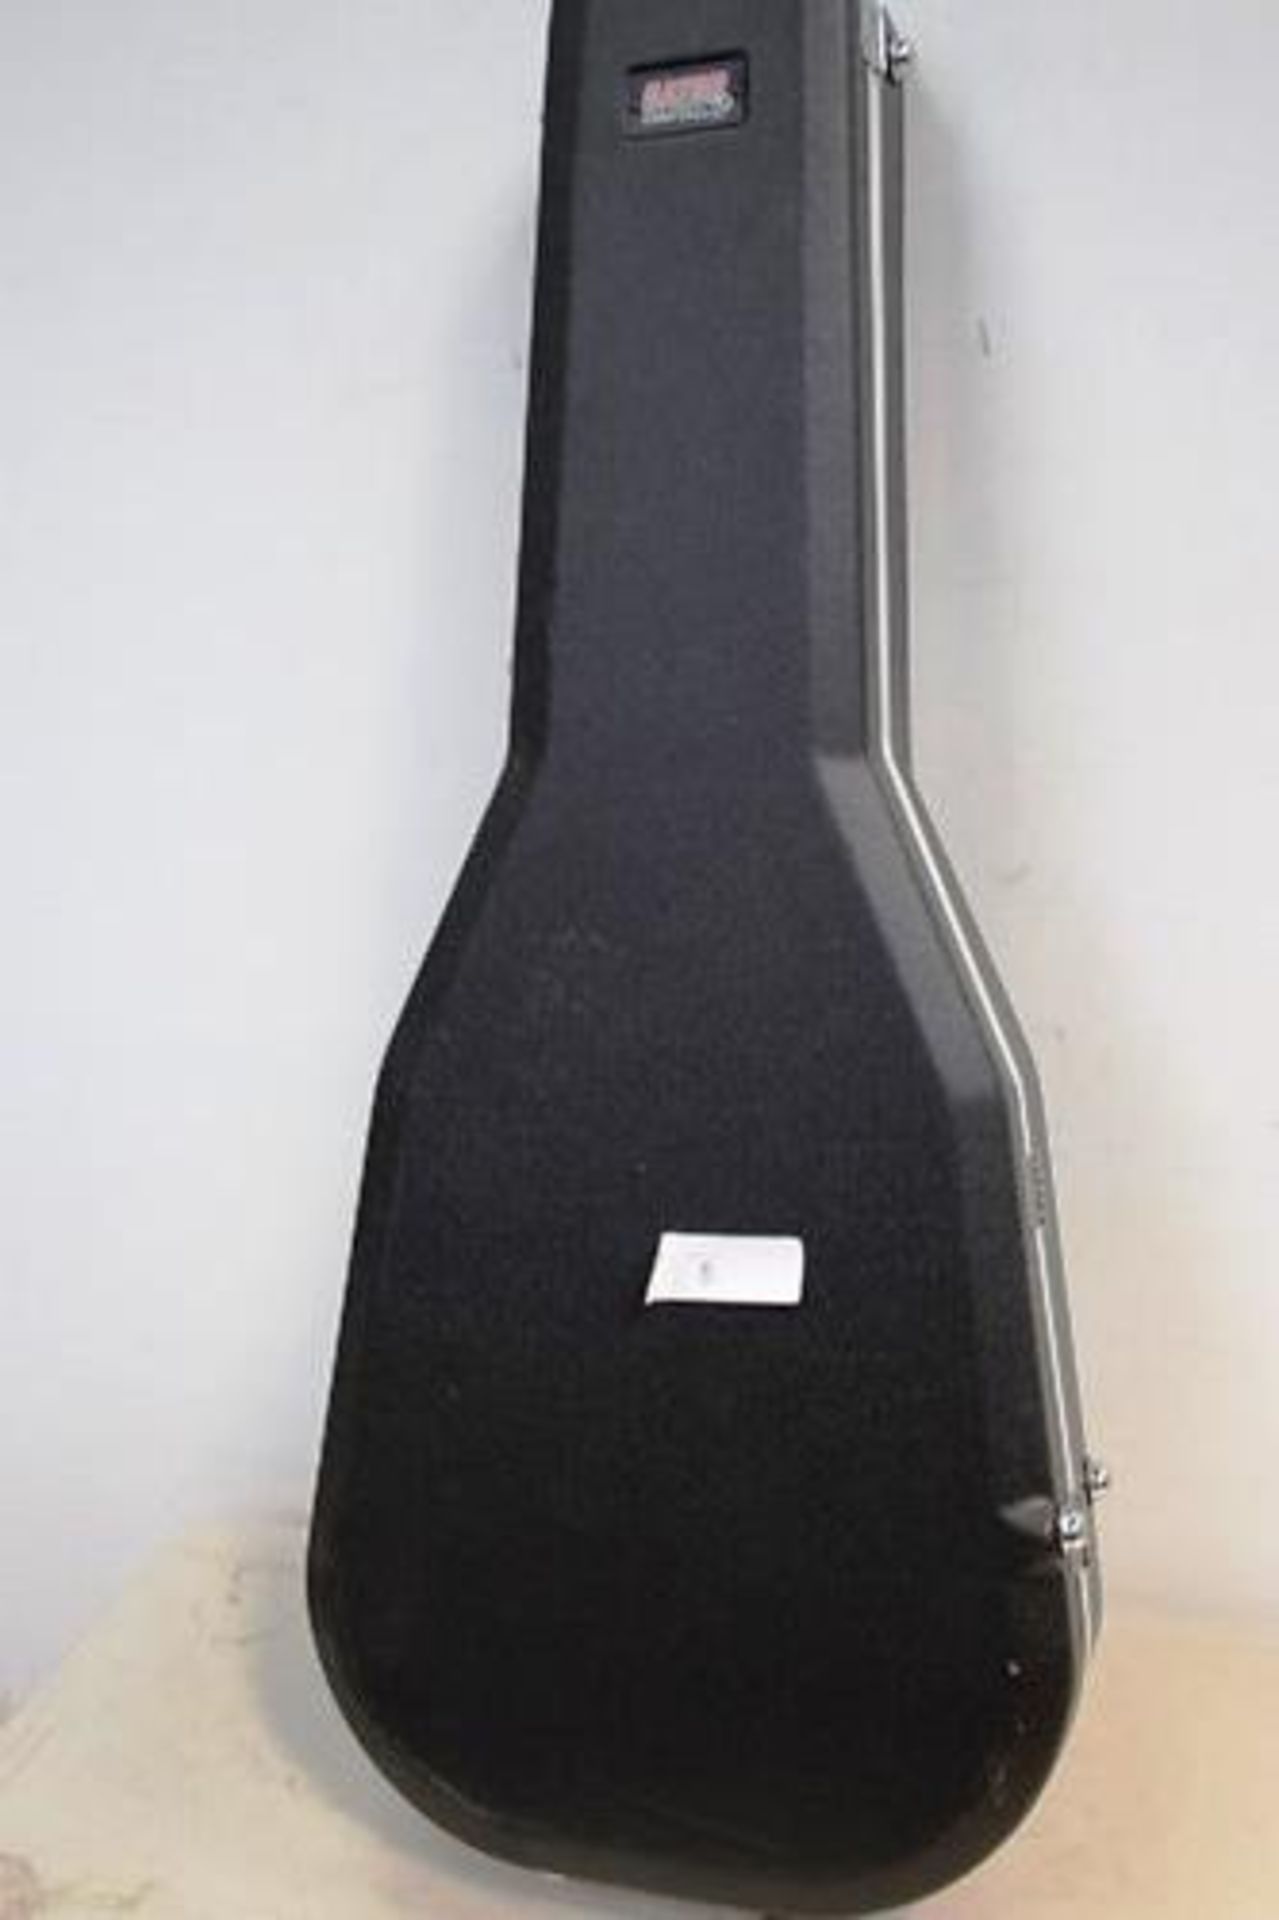 1 x Cordoba Iberia Series model C7CD acoustic guitar, together with Gator hard guitar case - - Image 4 of 4